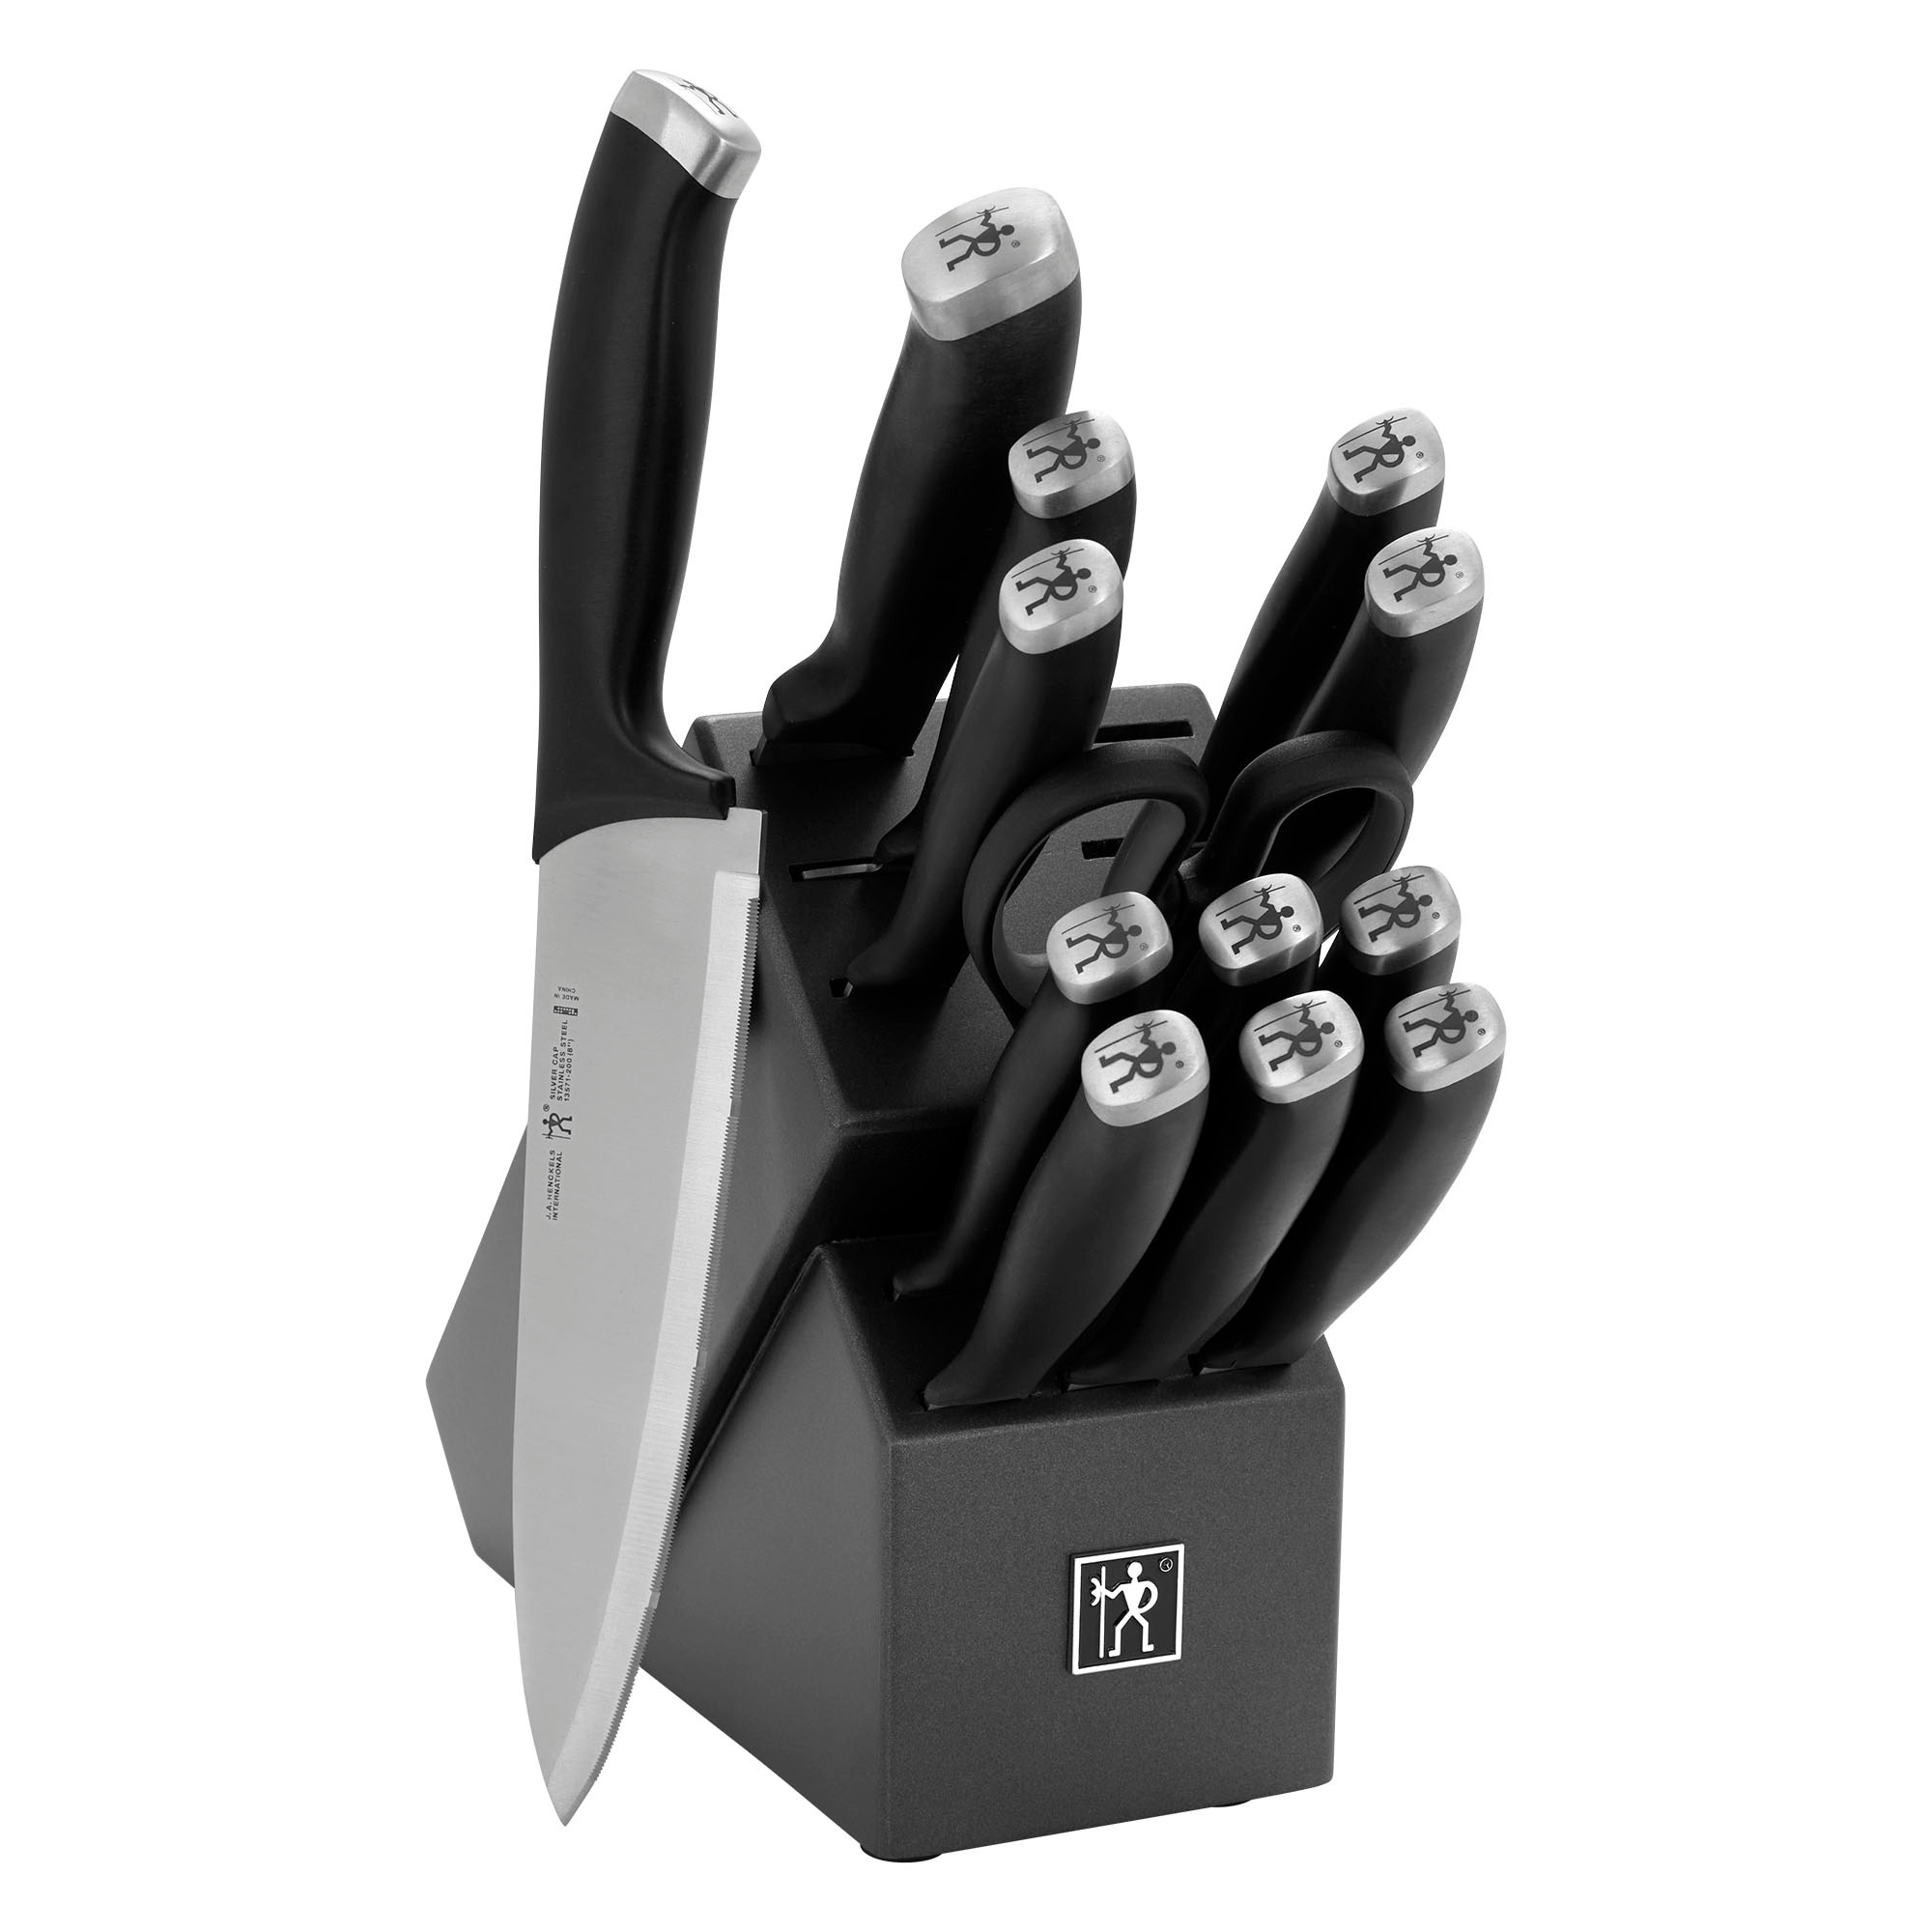 Zwilling J.a. Henckels International Forged Synergy 13 Pc. Knife Block Set, Cutlery, Household